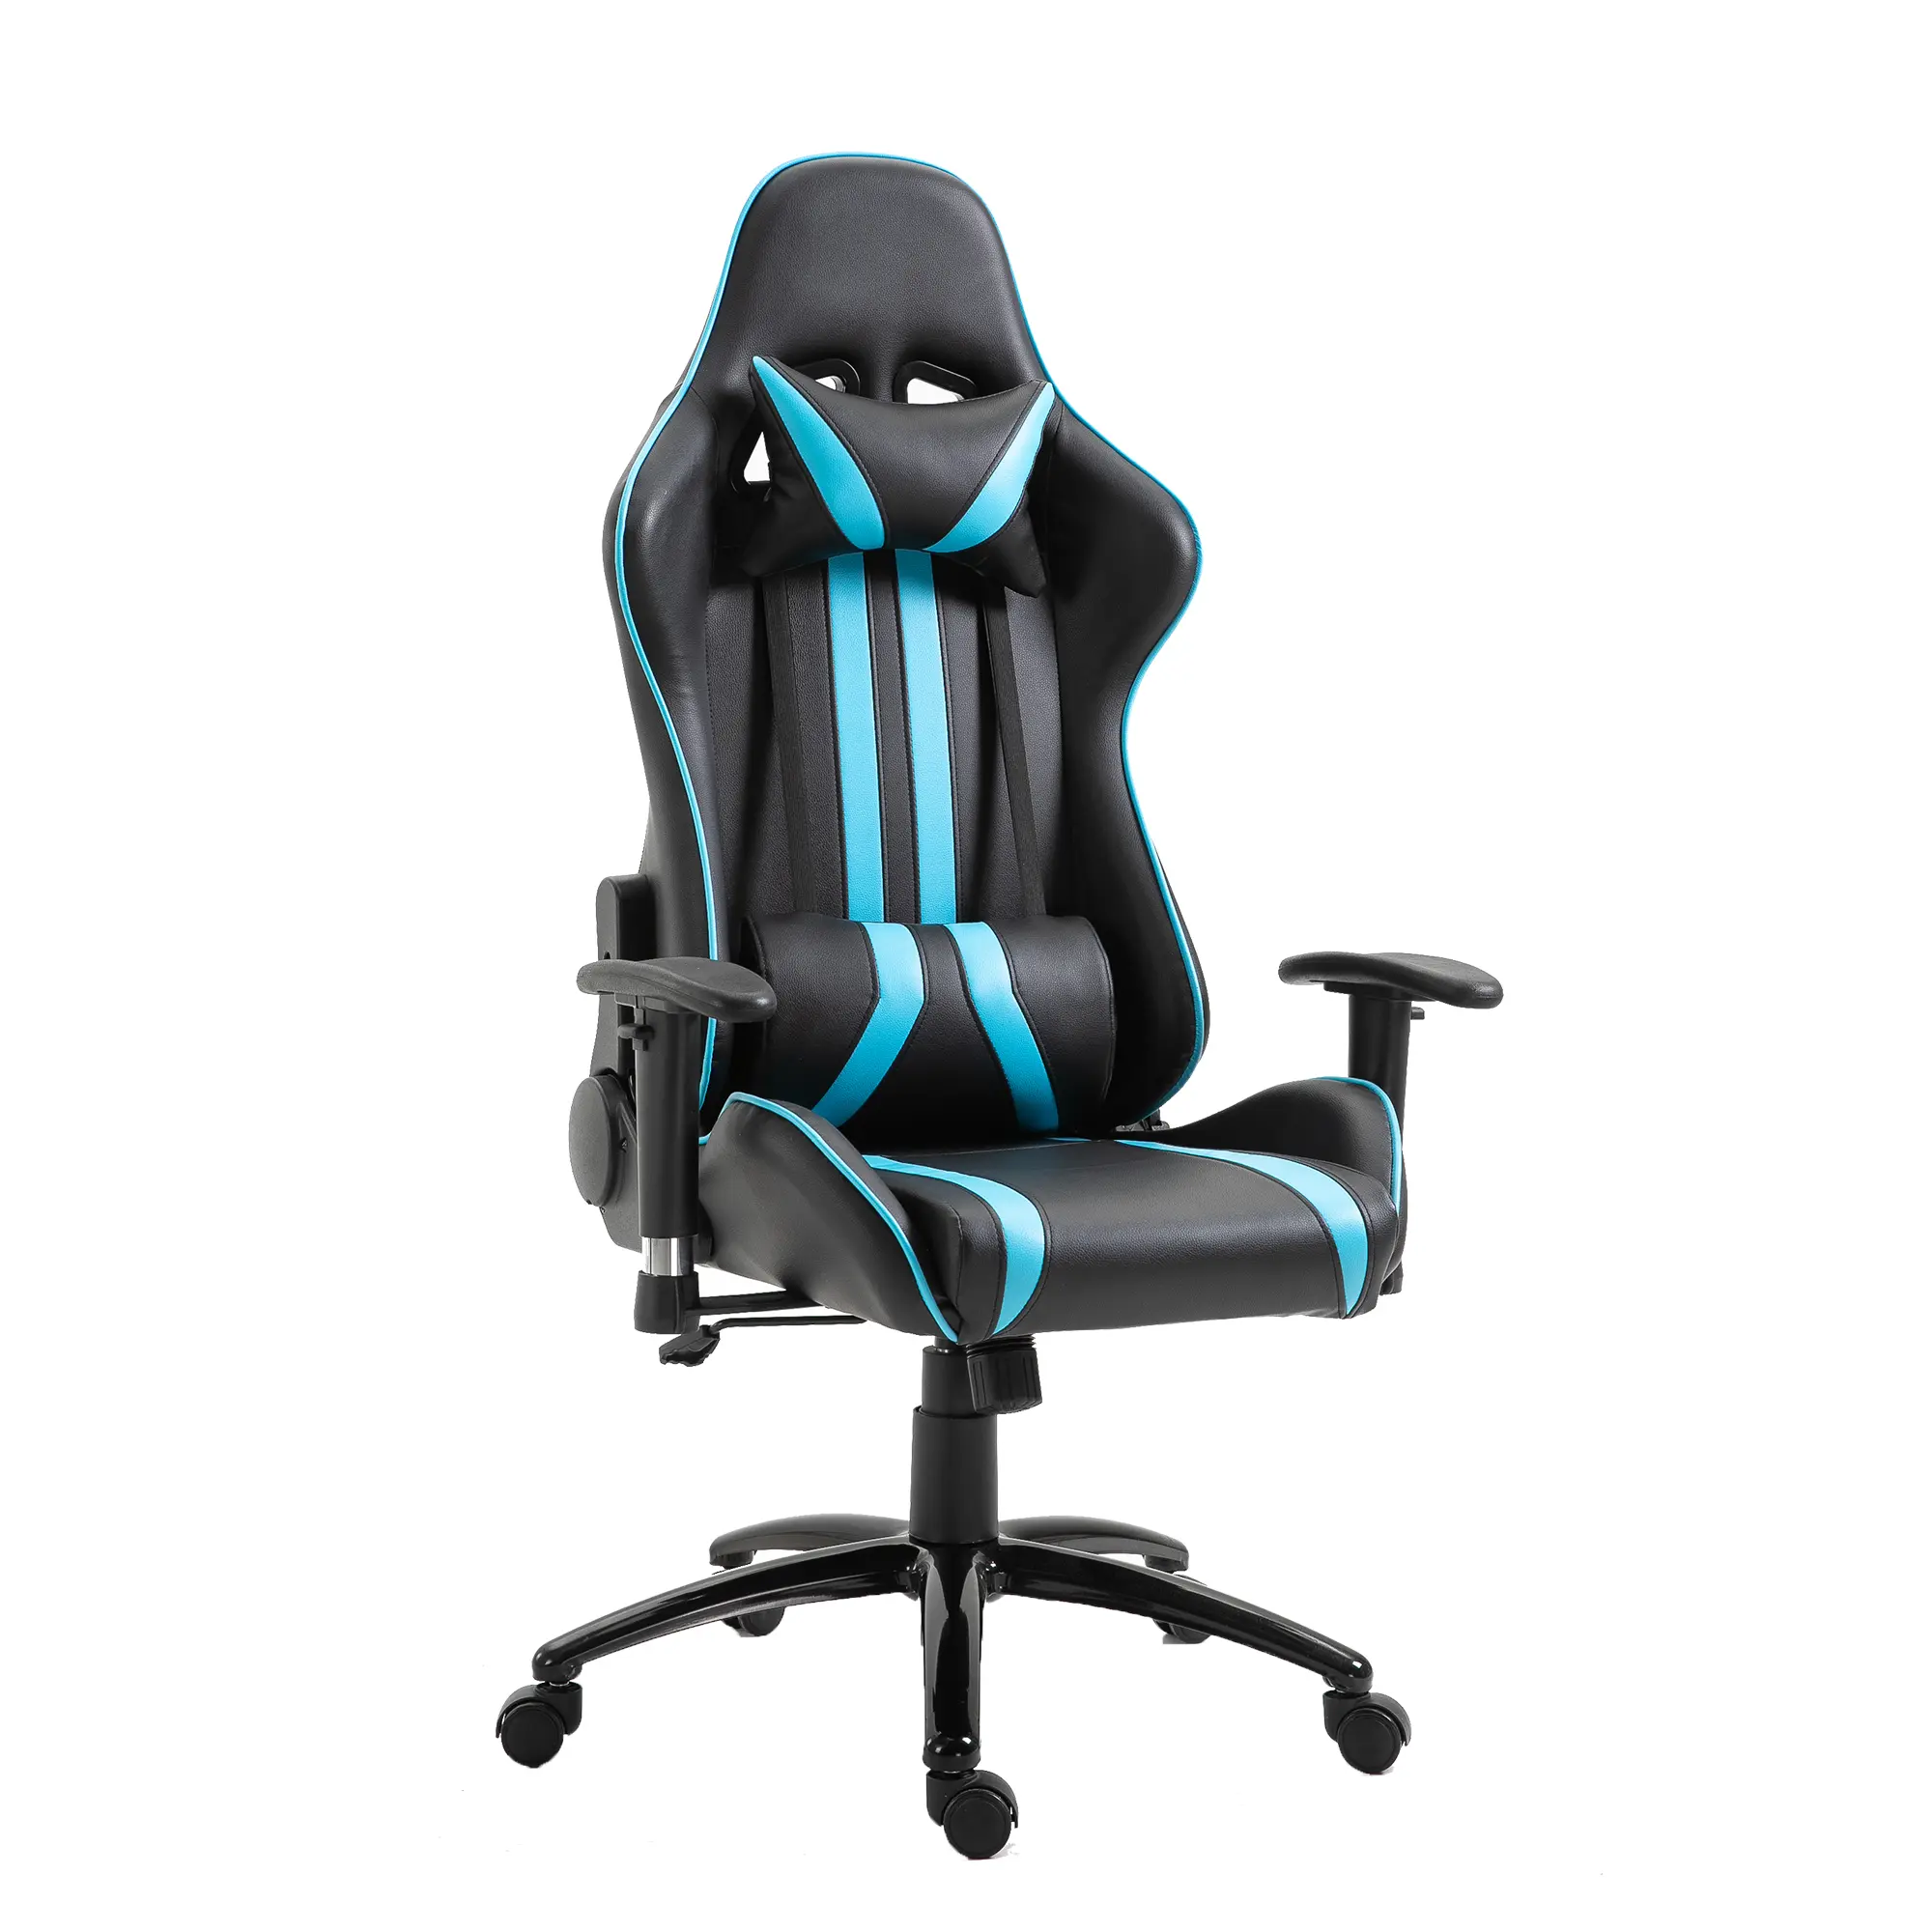 https://www.jifangfurniture.com/office-computer-chair-gaming-chair-racing-chair-for-gamer-office-gaming-cahir-product/